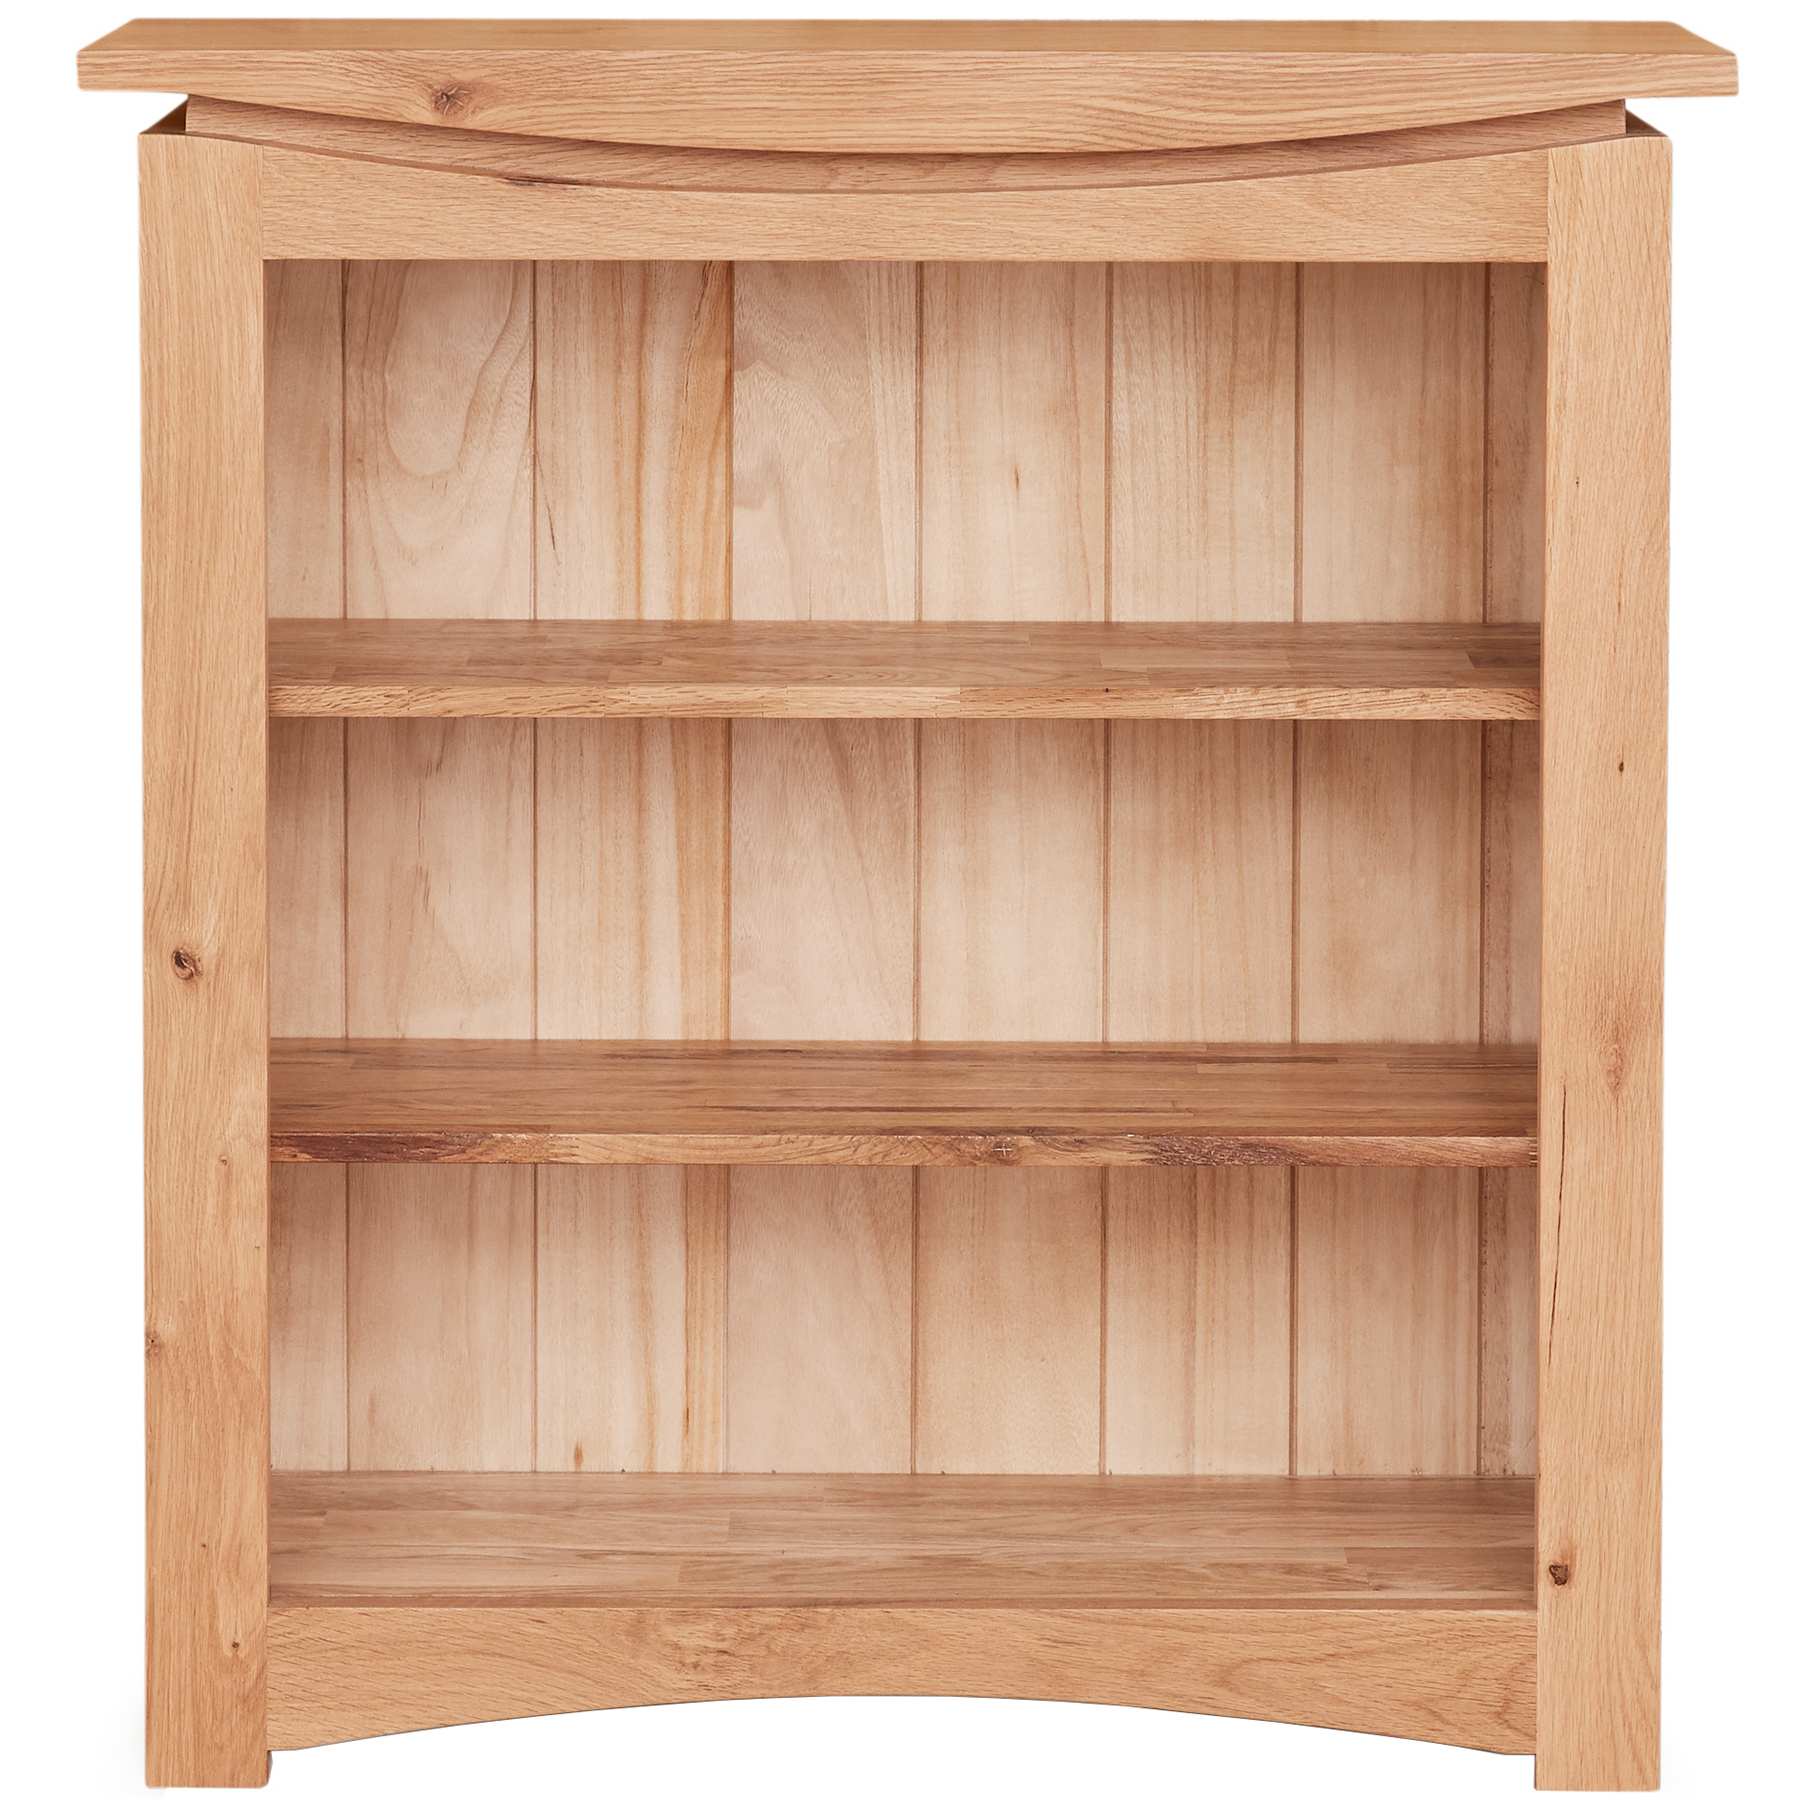 Addison Solid Oak Small Bookcase Wooden Office Bookcases